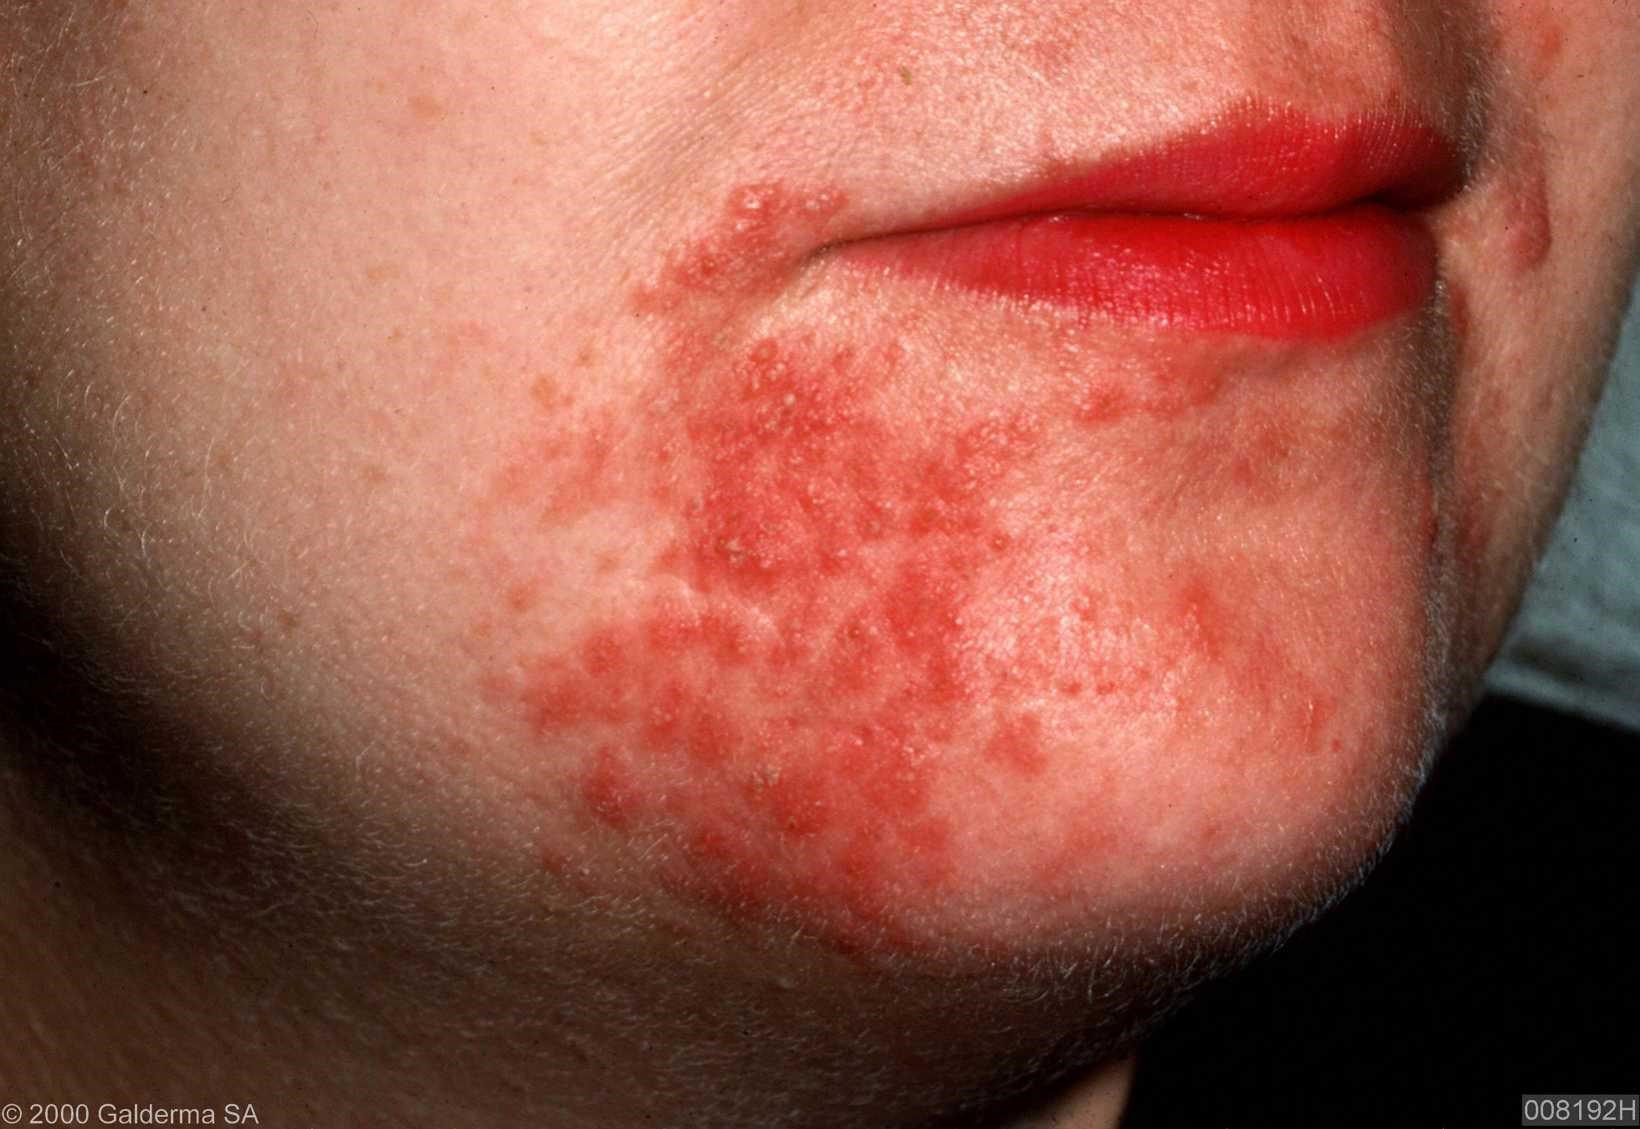 Rashes In The Mouth Pictures Photos